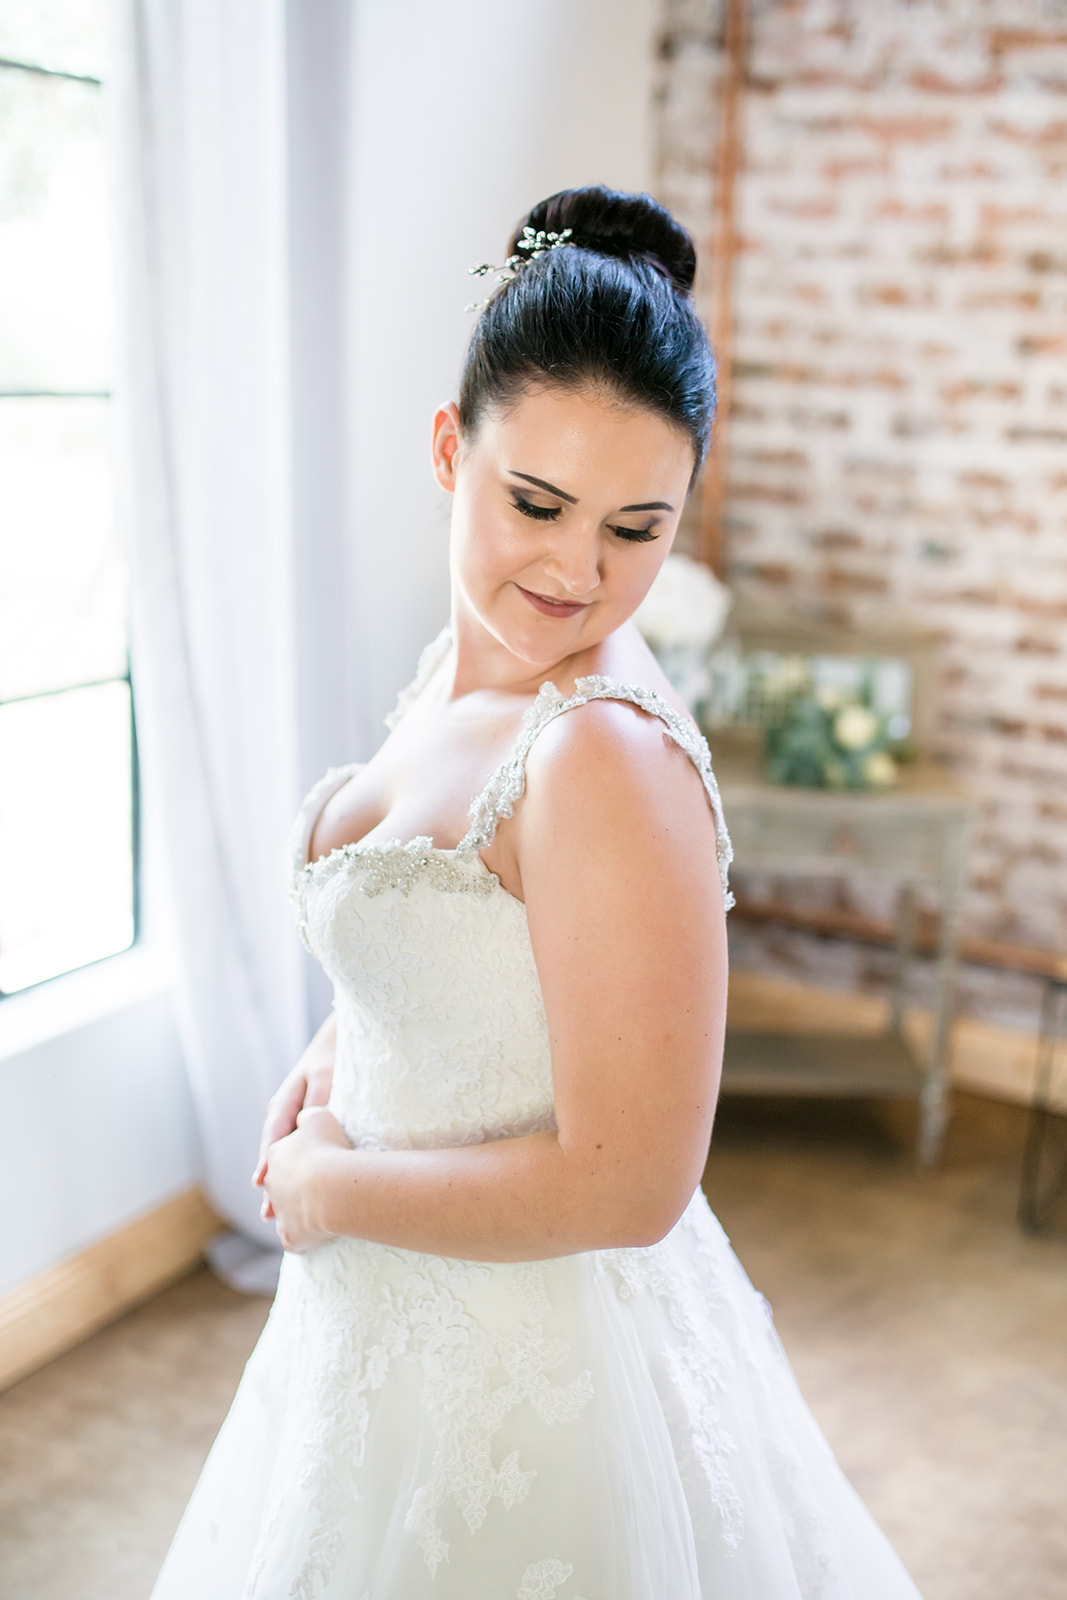 Lace on Timber Pretoria South Africa Wedding - The Overwhelmed Bride Wedding Blog